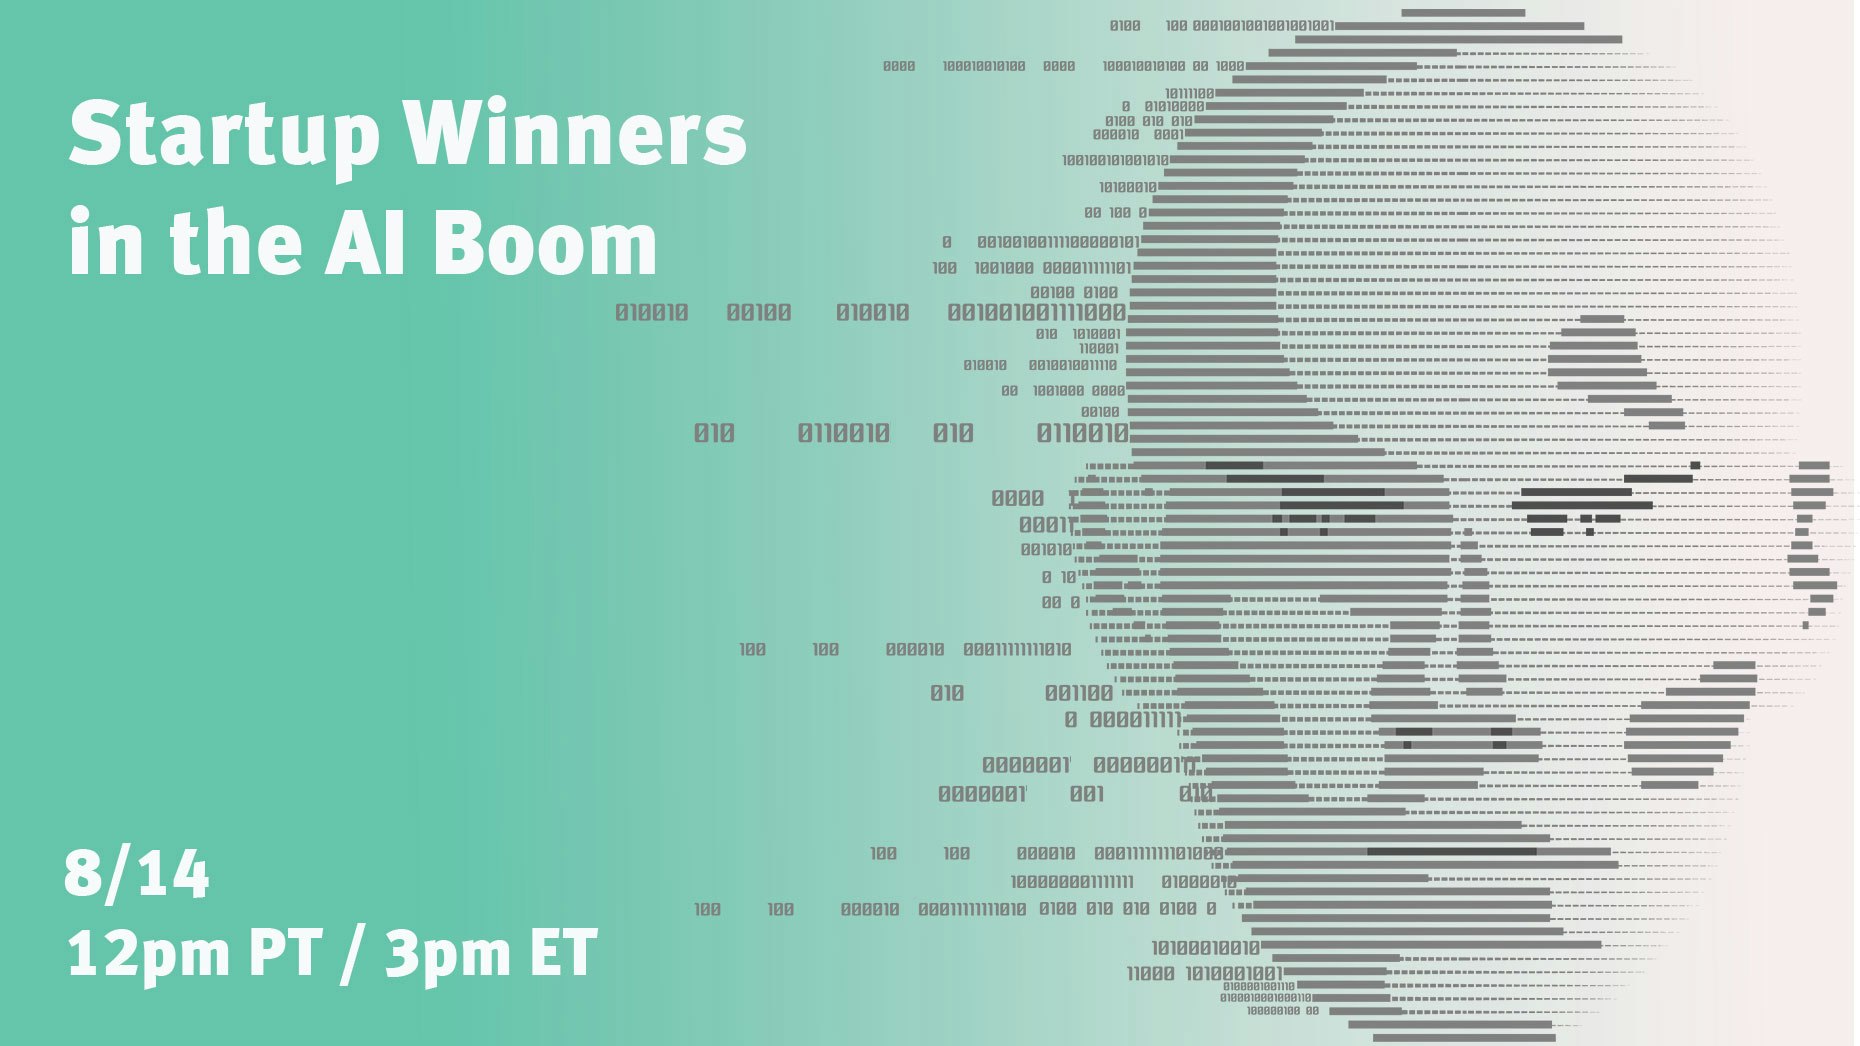 Startup Winners in the AI Boom